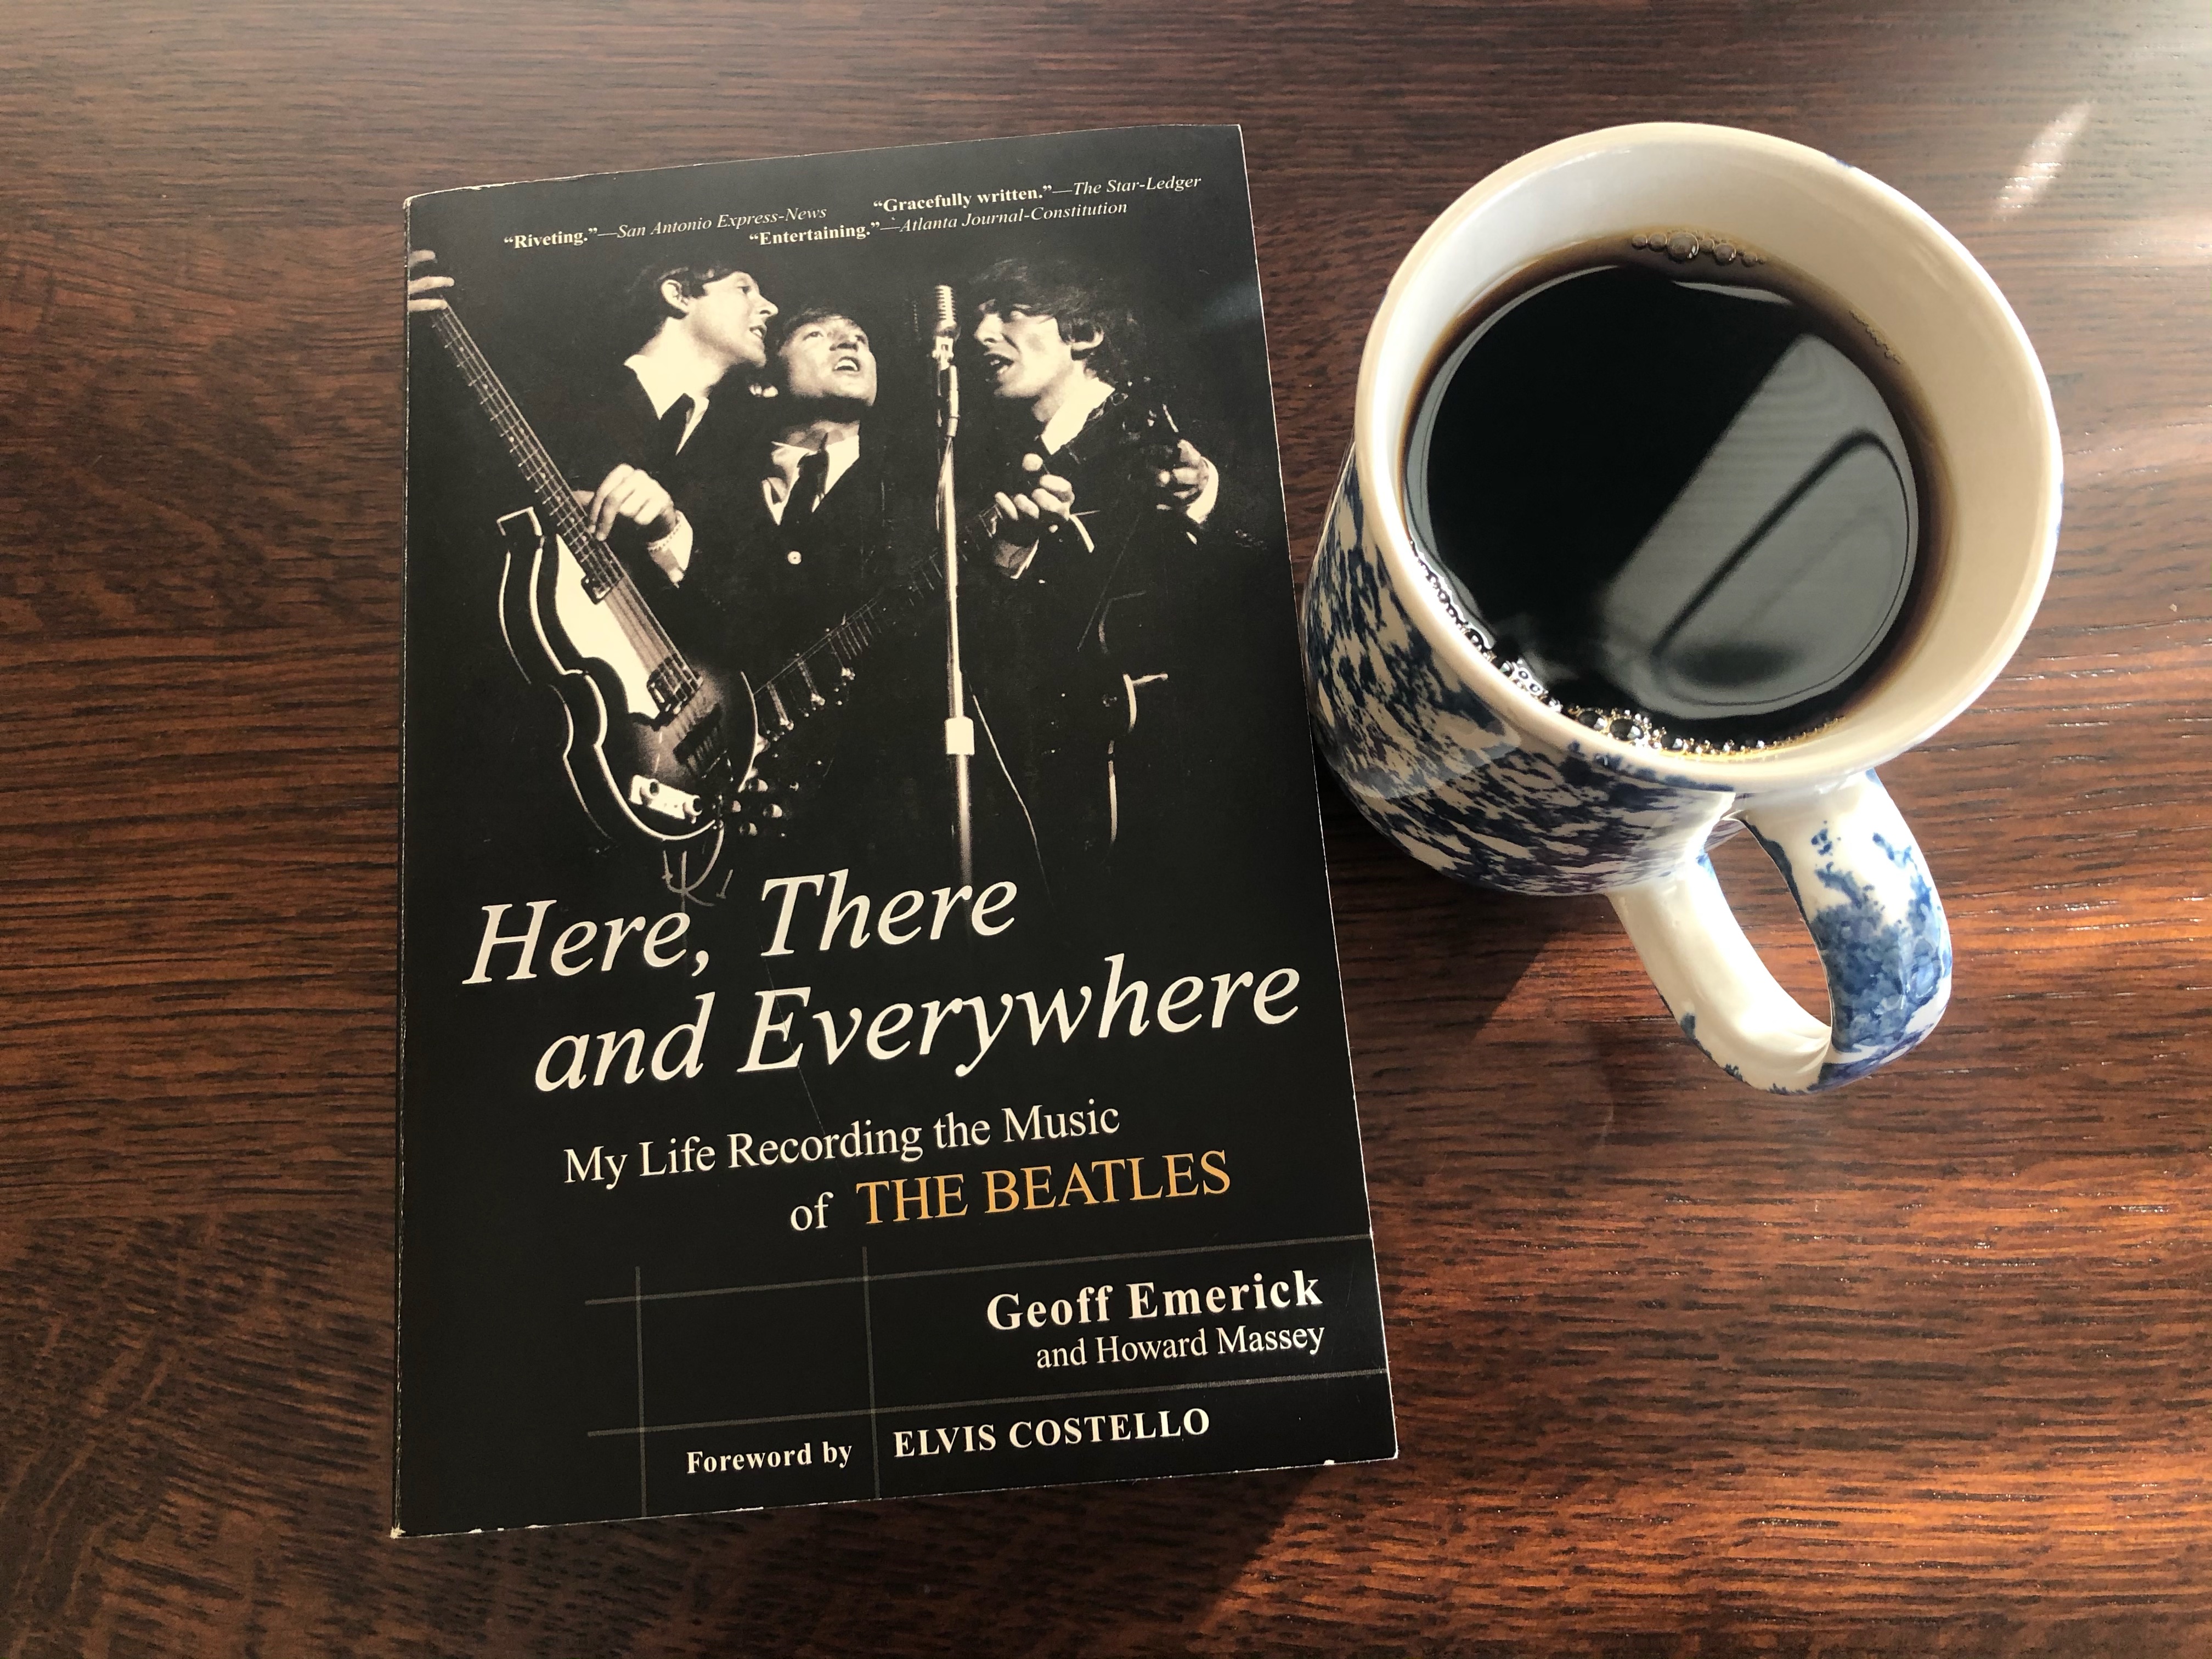 Here, There and Everywhere by Geoff Emerick book and a cup of coffee